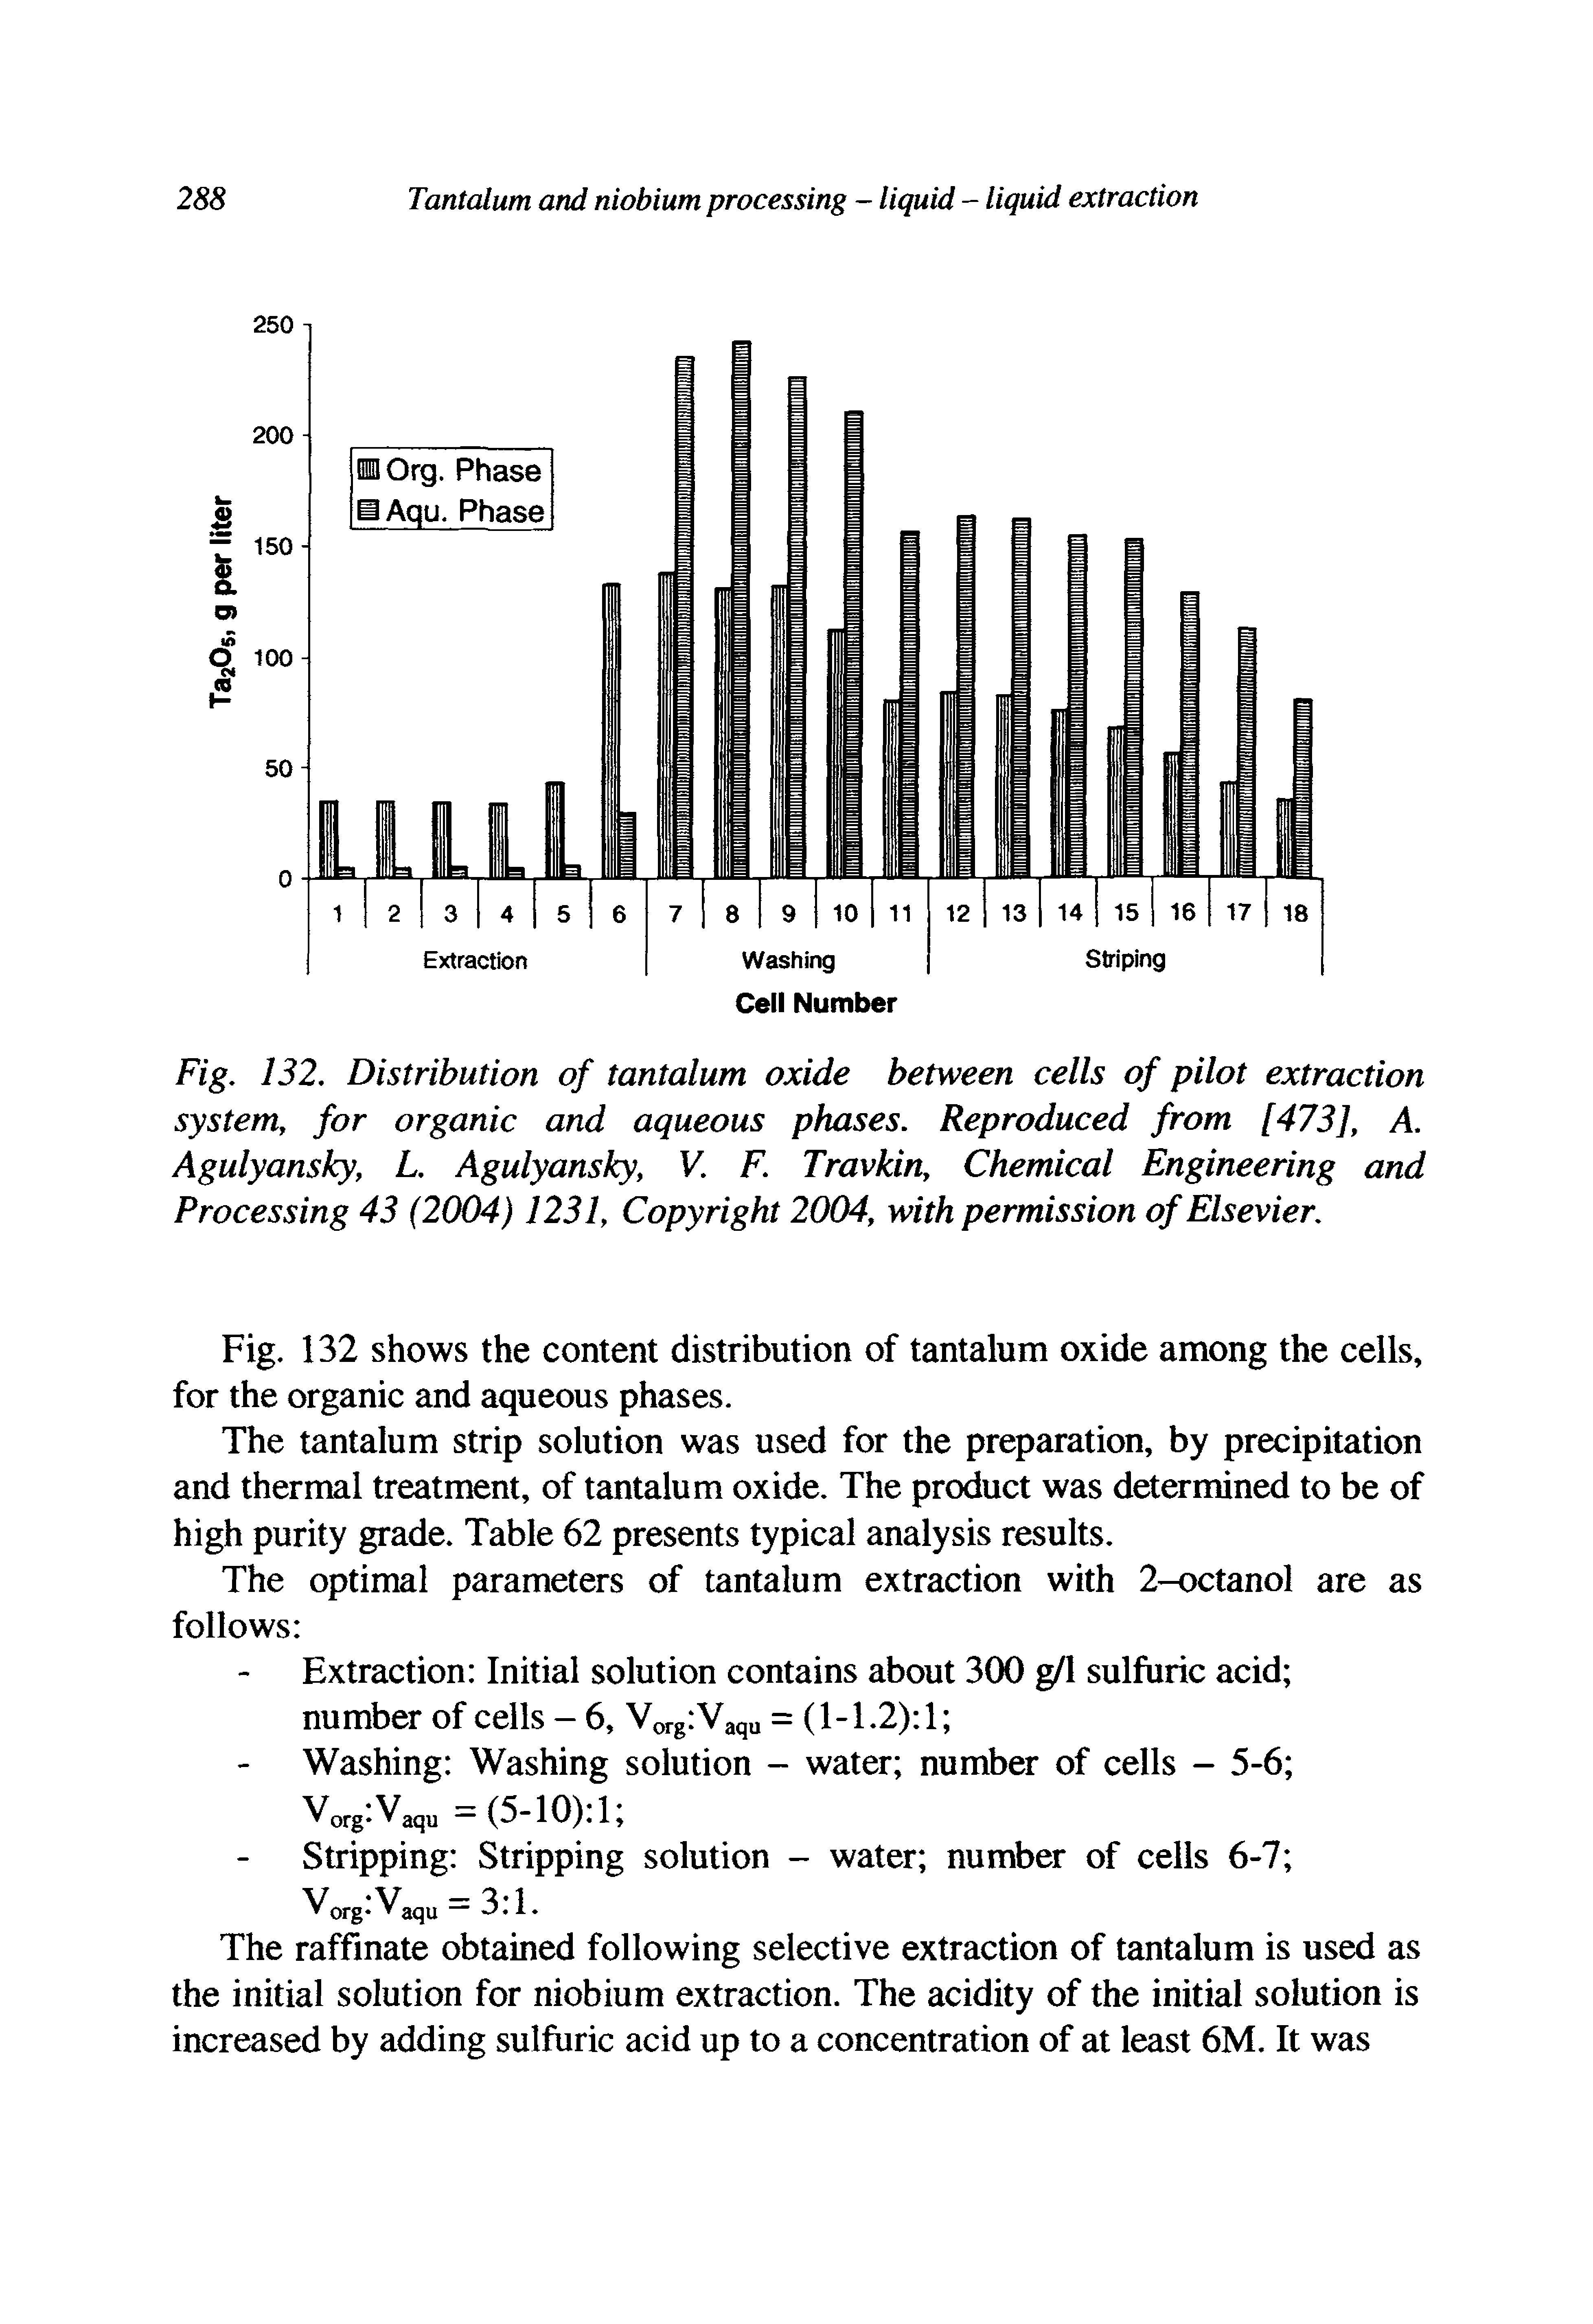 Fig. 132. Distribution of tantalum oxide between cells of pilot extraction system, for organic and aqueous phases. Reproduced from [473], A. Agulyansky, L. Agulyansky, V. F. Travkin, Chemical Engineering and Processing 43 (2004) 1231, Copyright 2004, with permission of Elsevier.